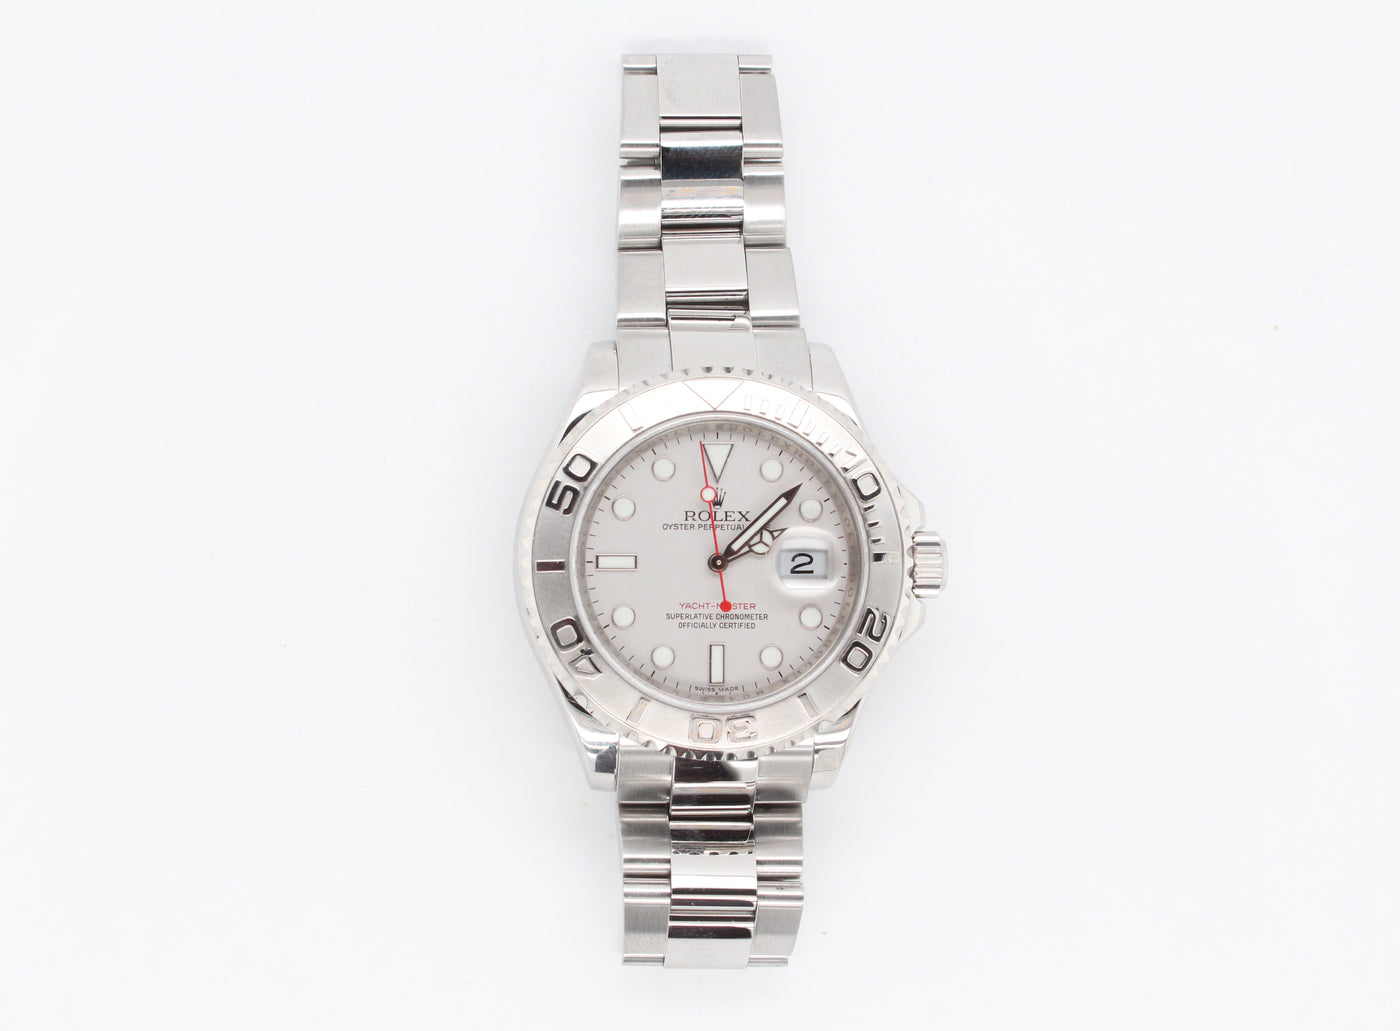 Stainless Gents Rolex Oyster Perpetual Yacht Master Watch